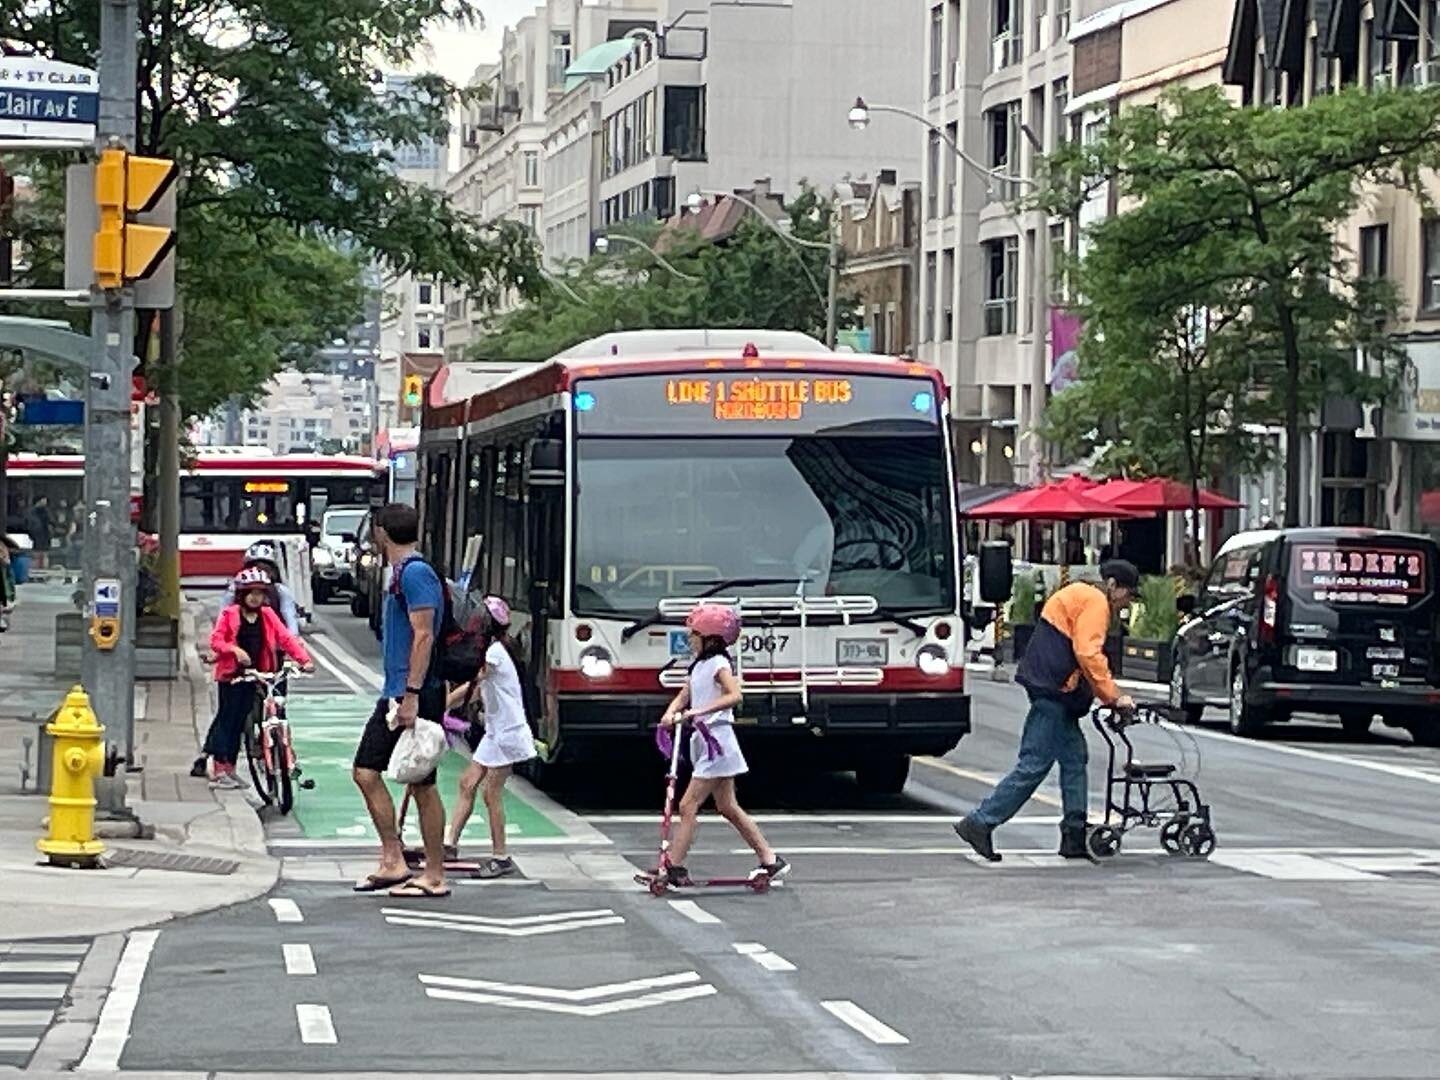 Love the complete street design at Yonge &amp; St. Clair! Safe &amp; comfortable infrastructure for young and old, whether they walk, roll, take transit, or drive. 😊